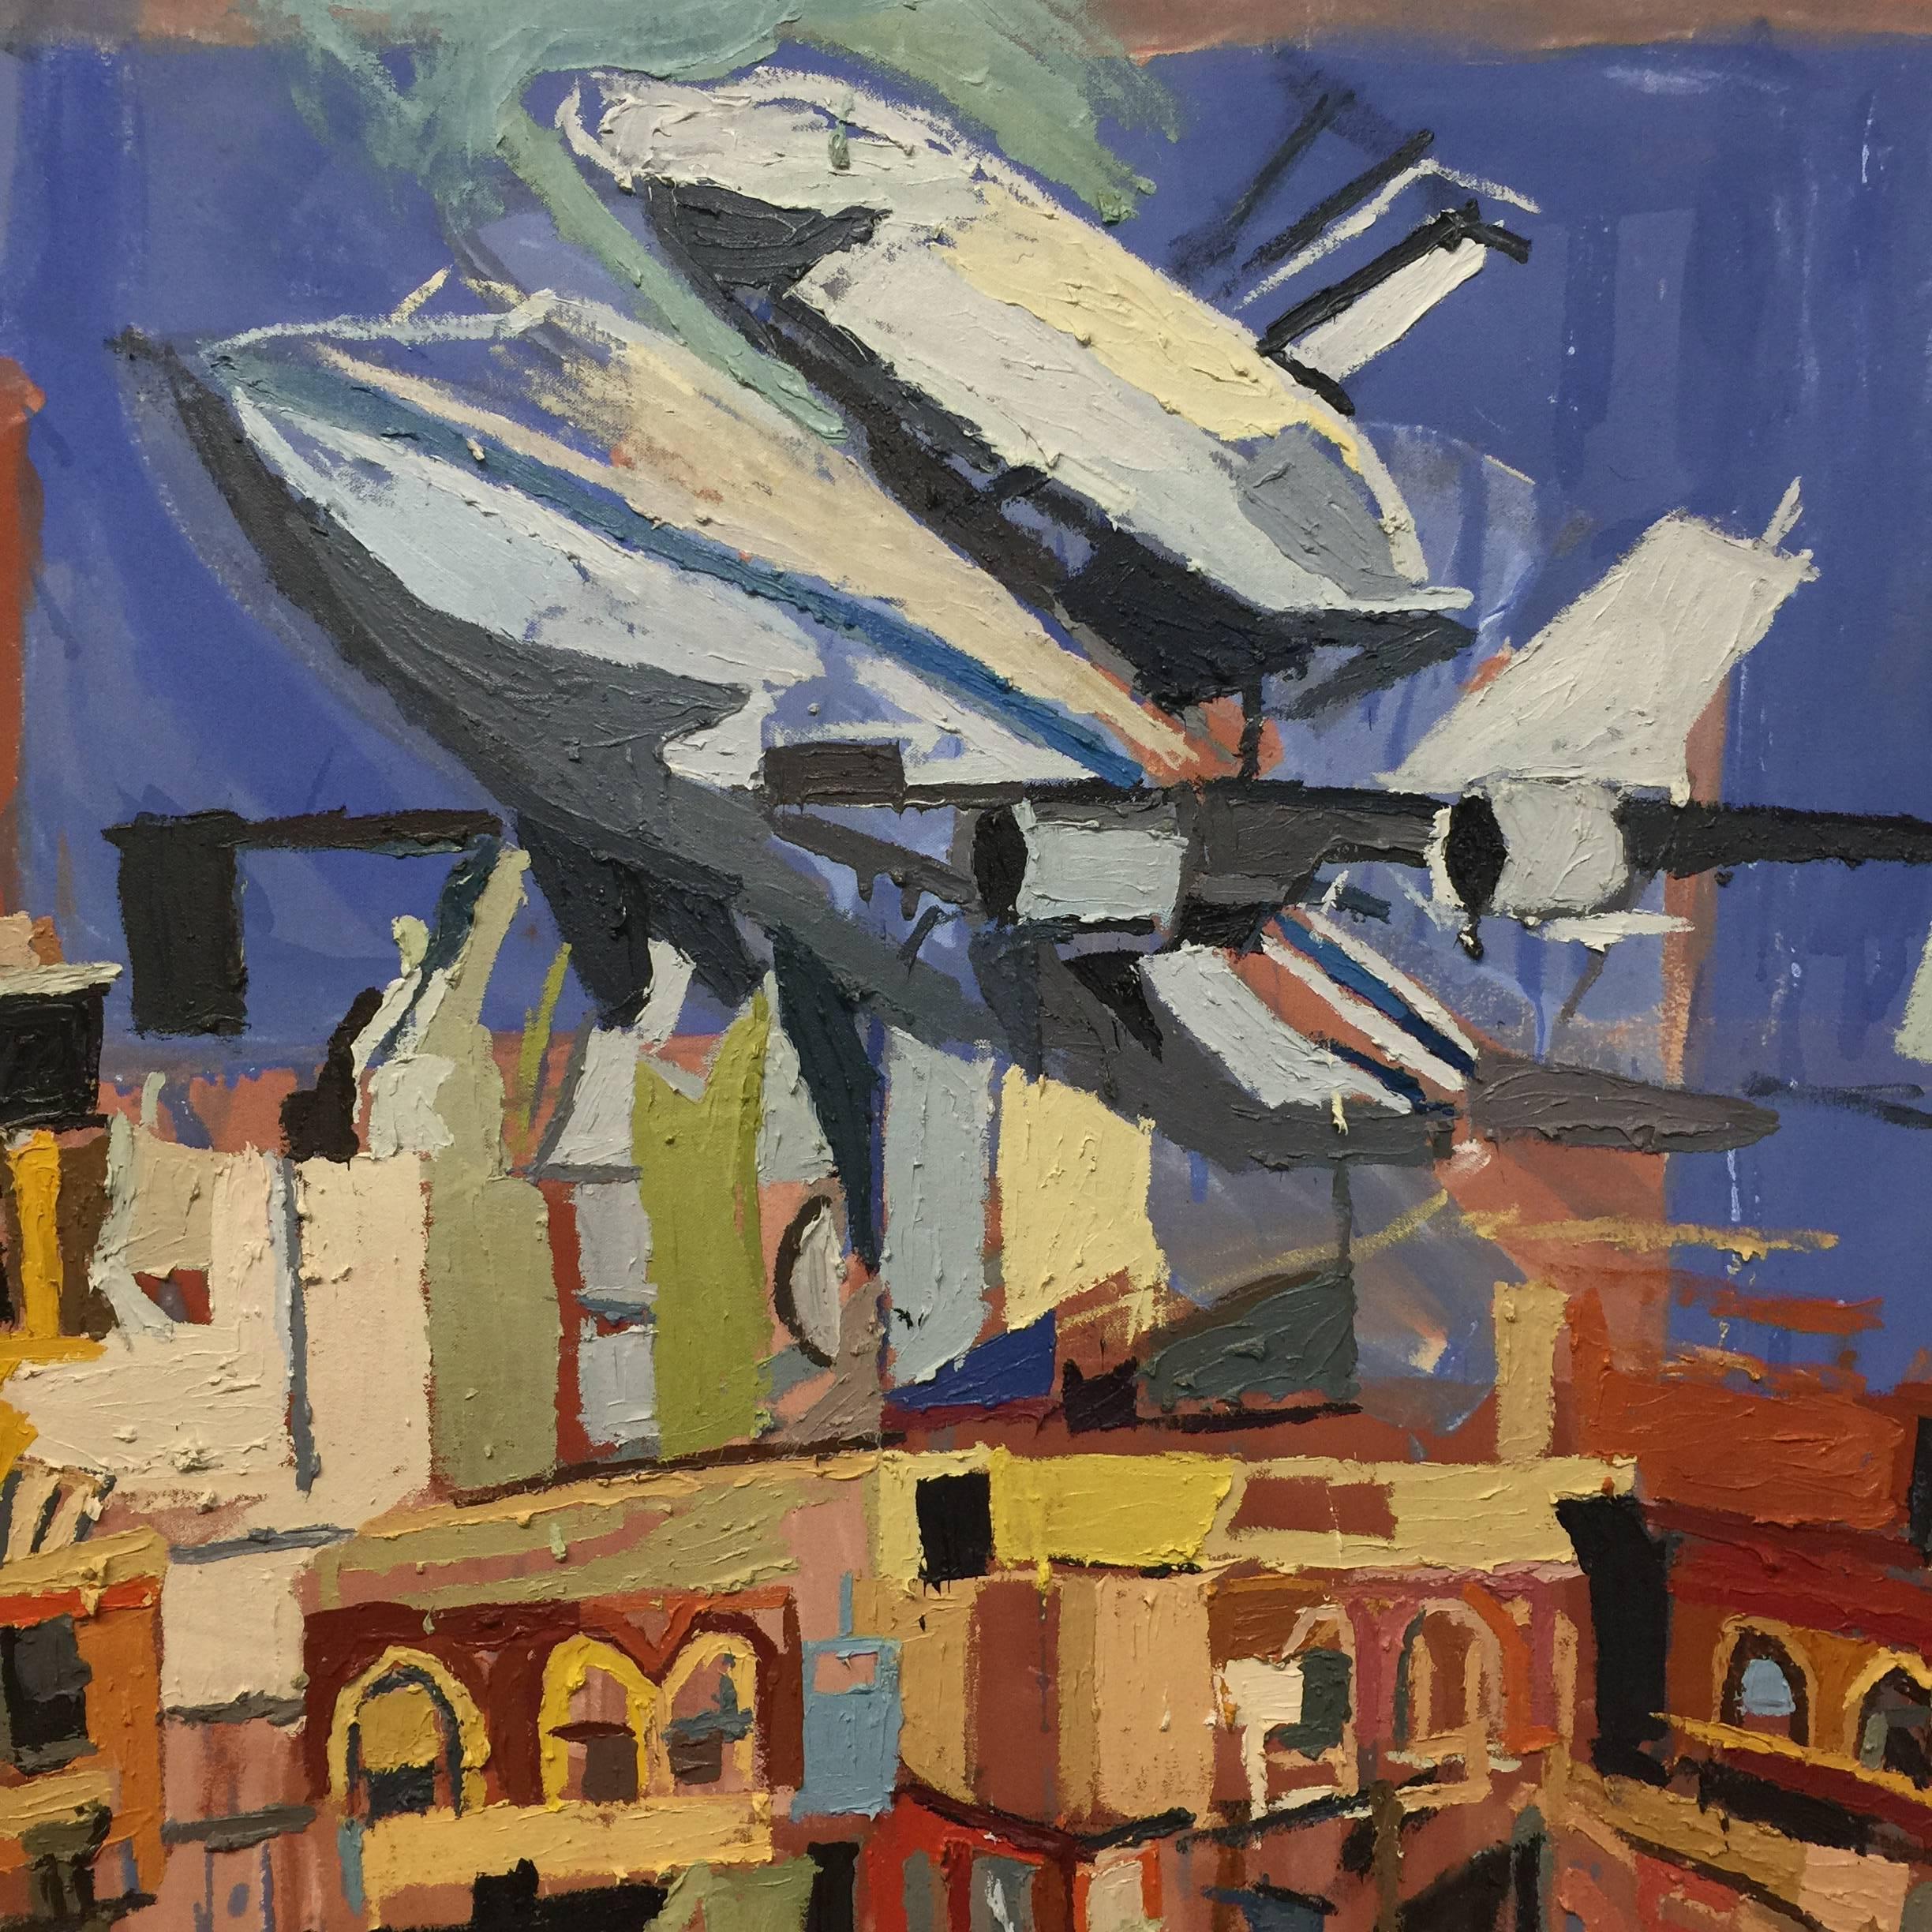 Canvas Space Shuttle over Harlem Oil Painting by New York Artist Clintel Steed, 2012 For Sale